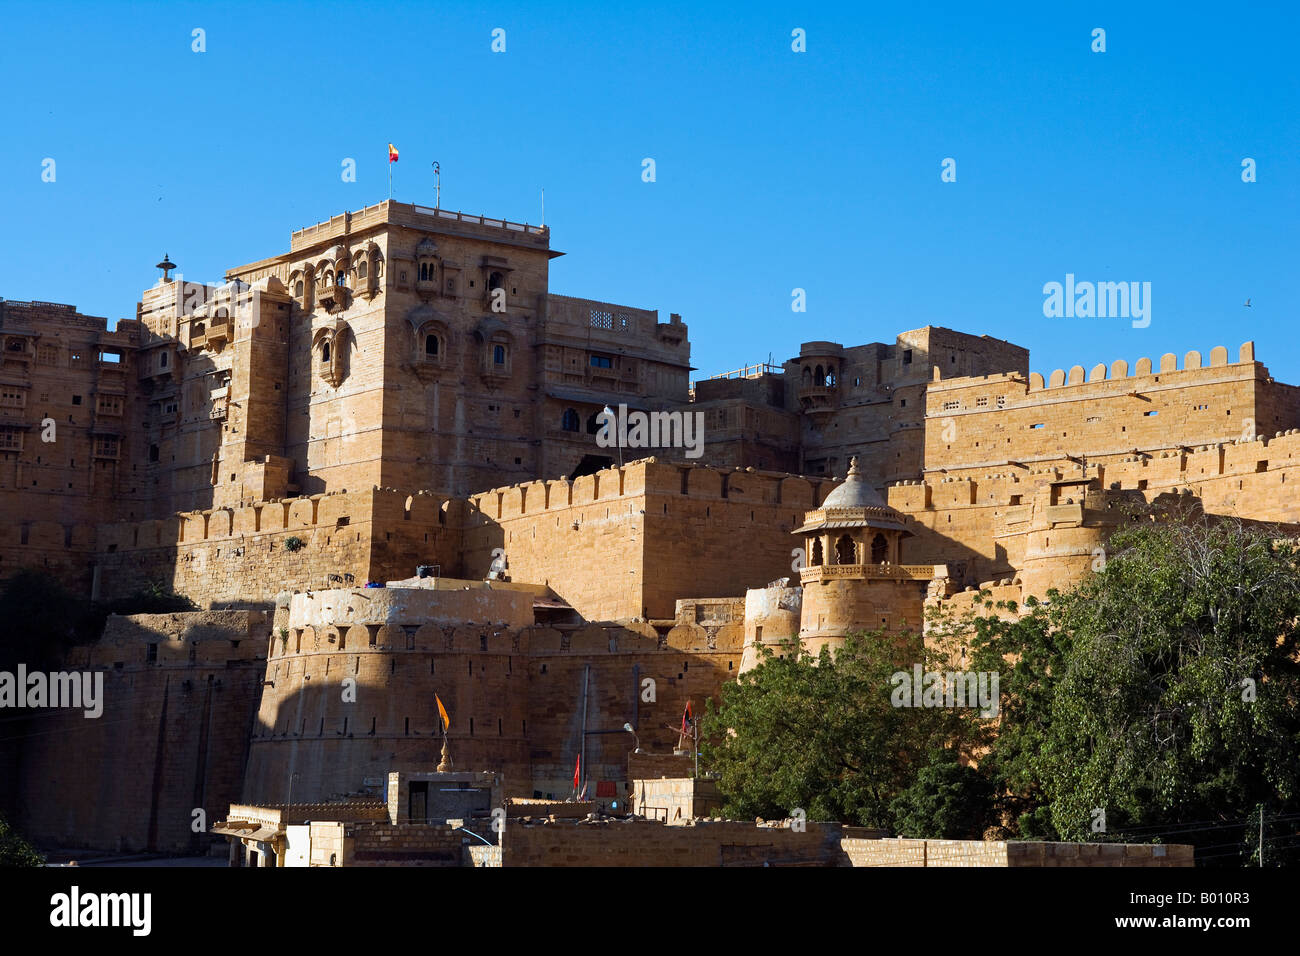 India Rajasthan Jaisalmer Jaisalmer Fort The ramparts and towers of the main living fort built in 1156 by the Bhati Rajput ruler Jaisal It is situated on Trikuta Hill and has been the site of many battles Stock Photo